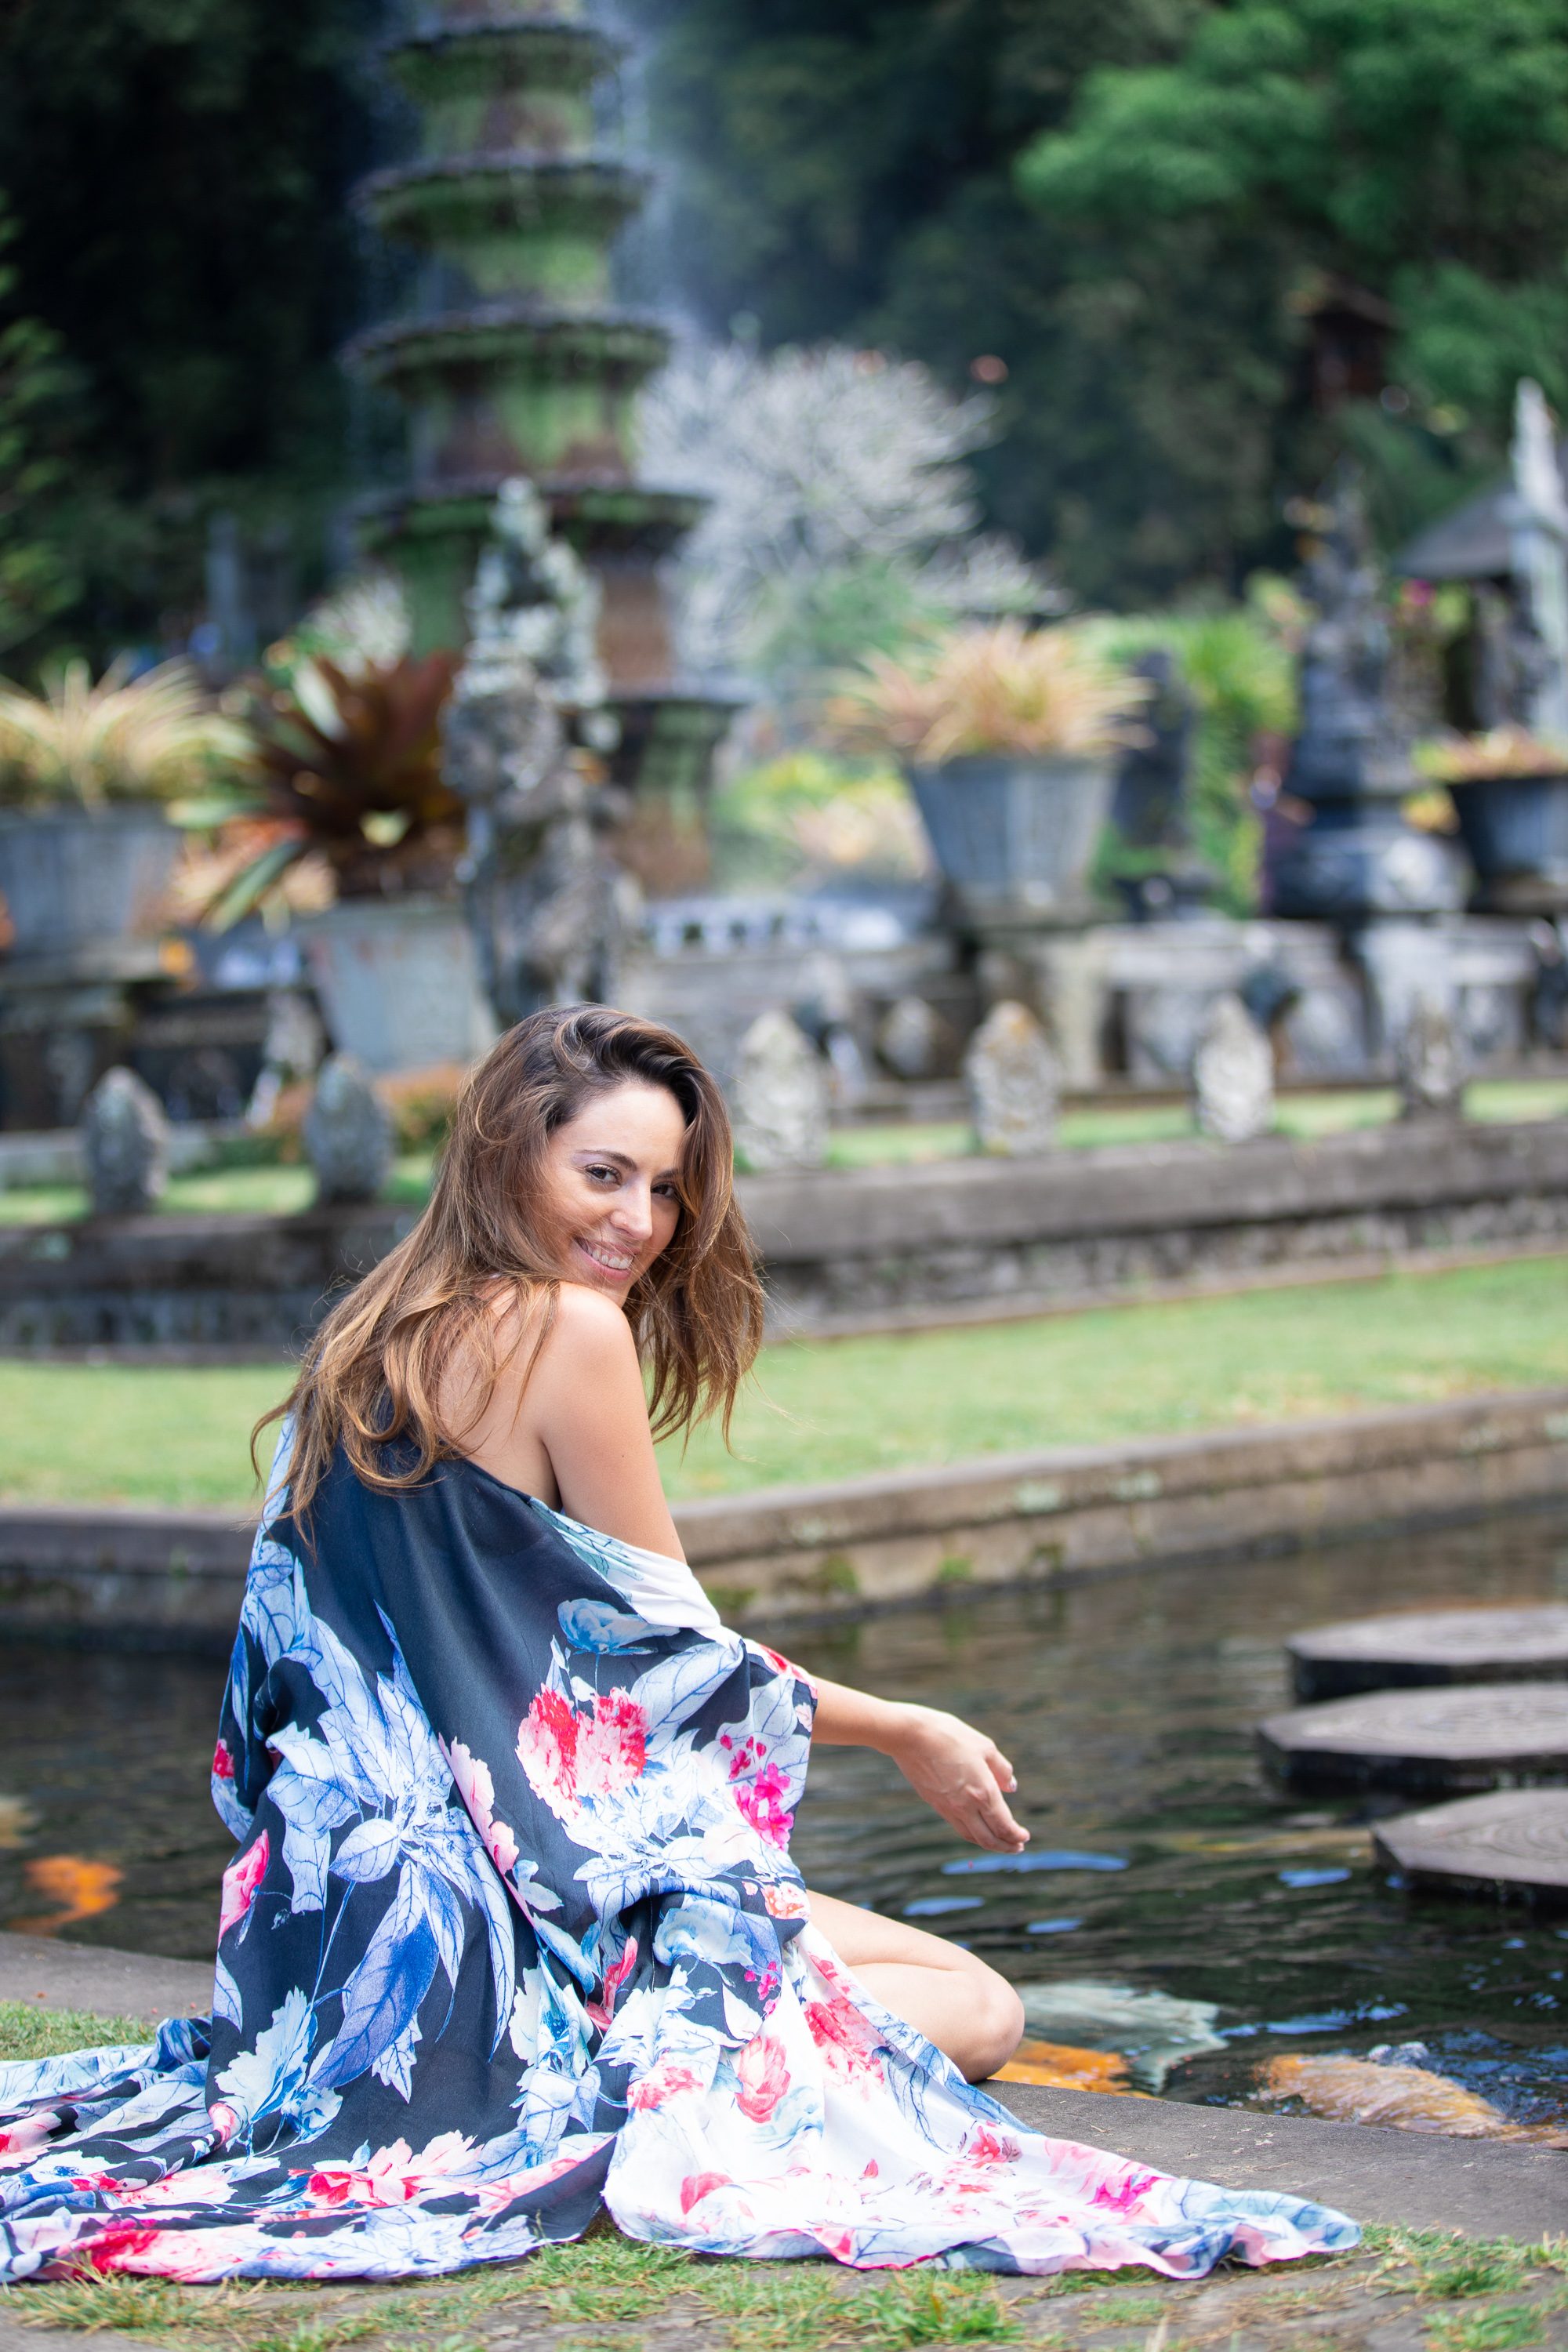 tirta gangga, Bali water palace, what to do in Bali, things to do in east bali, destination in east bali, where to feed fish in bali, koi fish bali, big lily pads bali, temples in bali, sights in bali, tourist destinations in bali